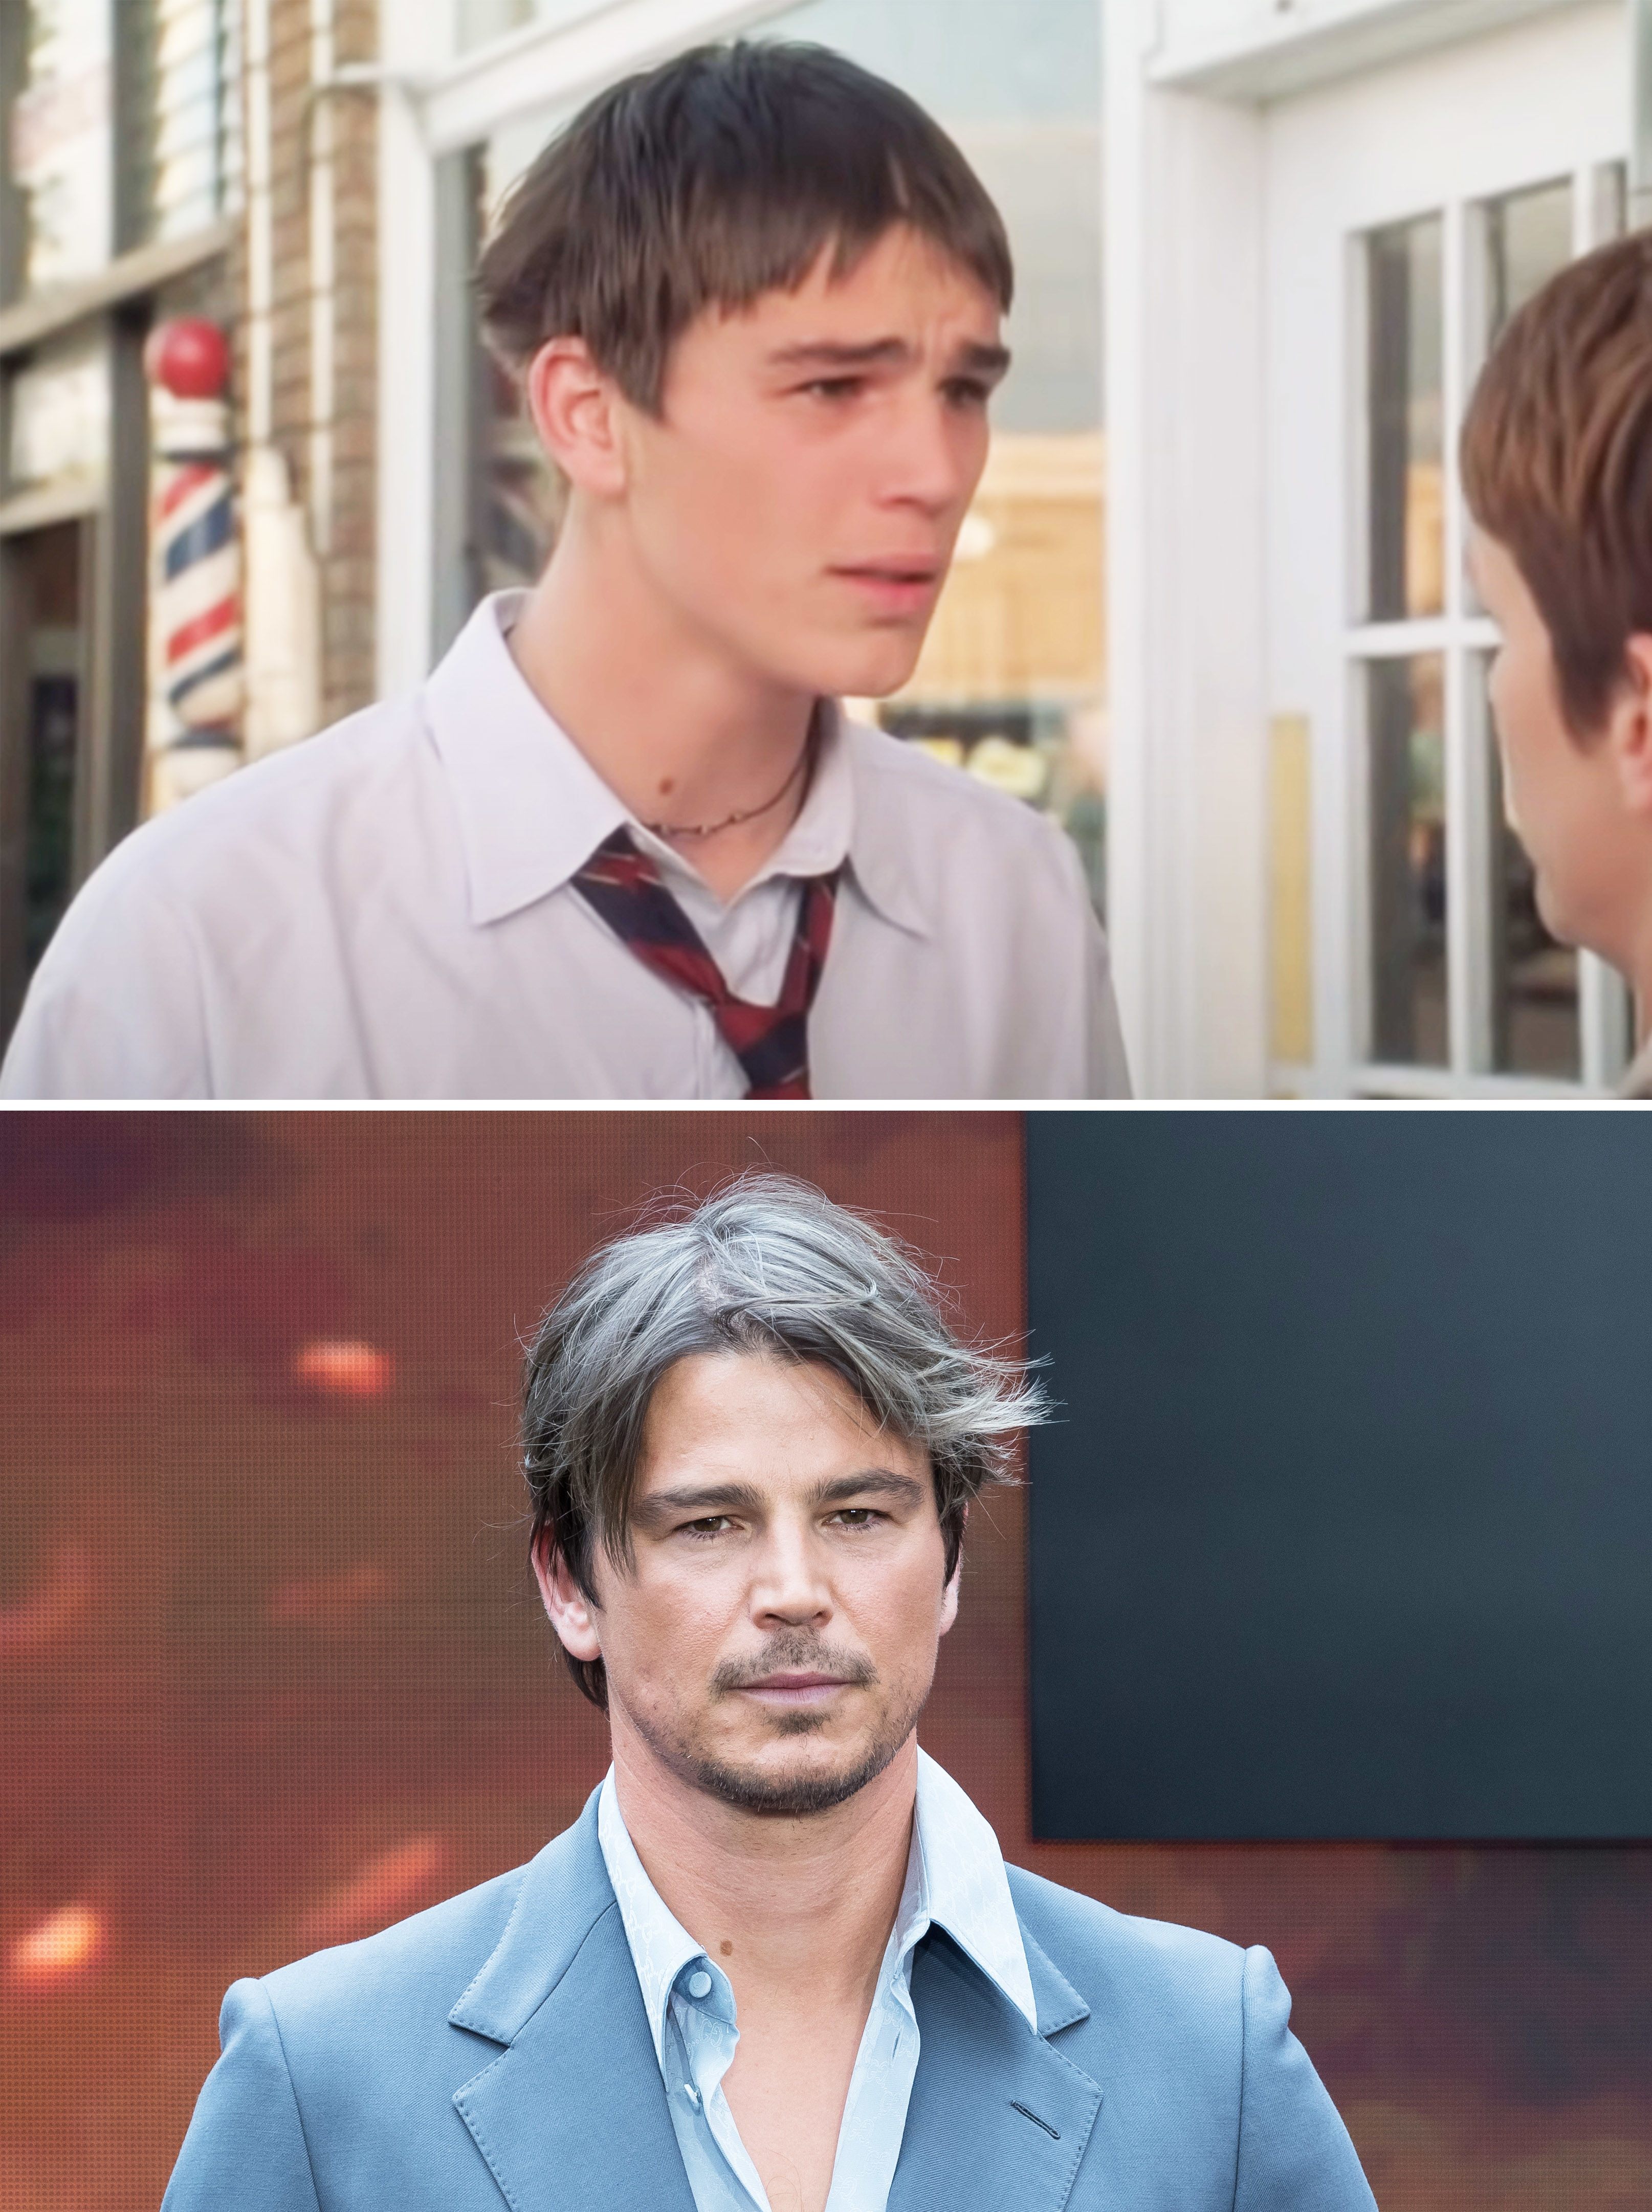 Josh in a scene from the movie and in a close-up at a media event